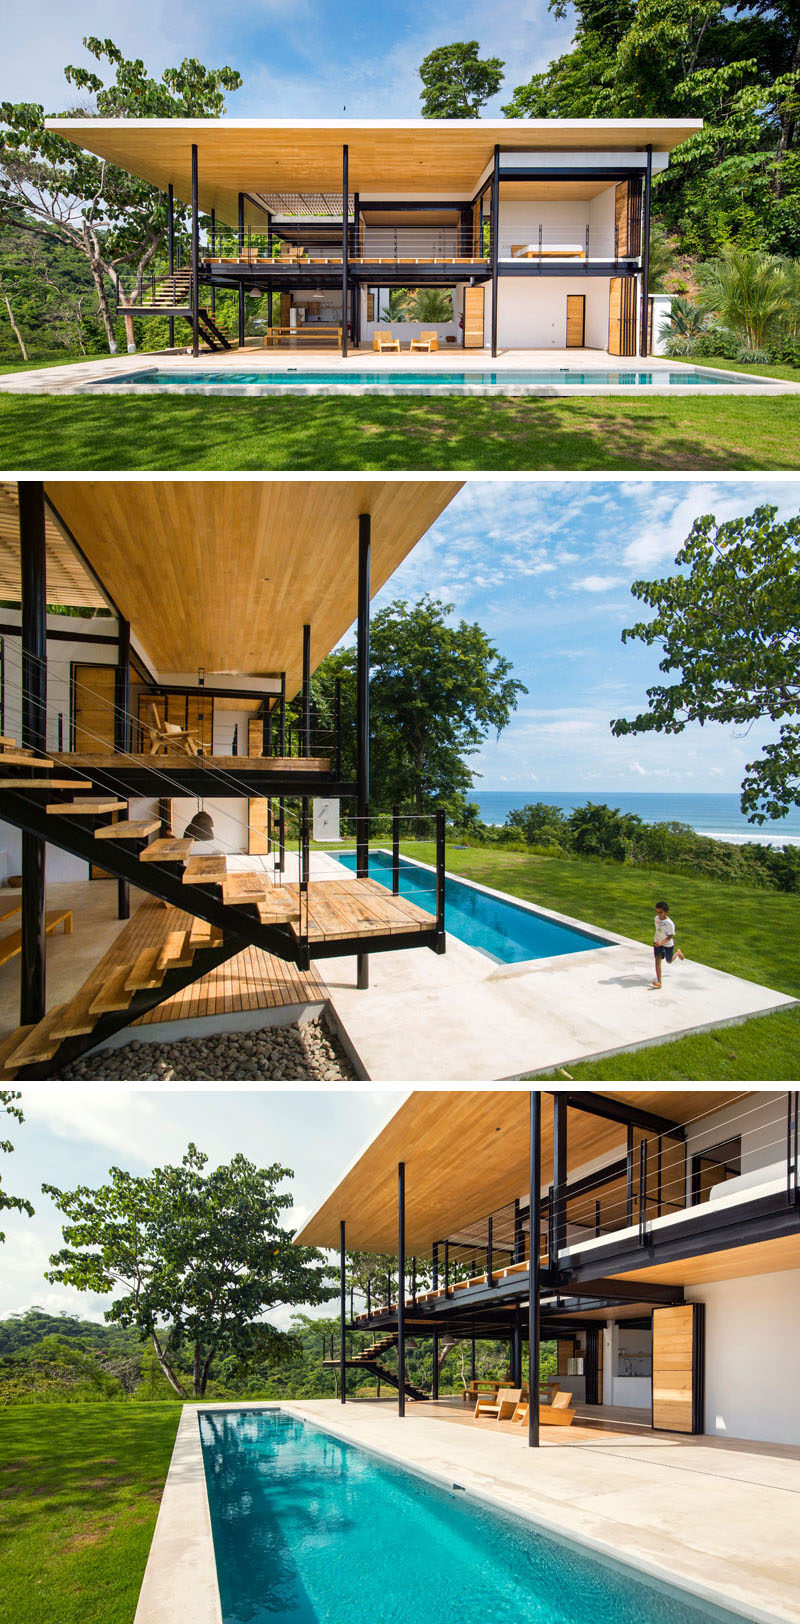 A long swimming pool at the front of this home in Costa Rica, provides a separation from the grassy area.